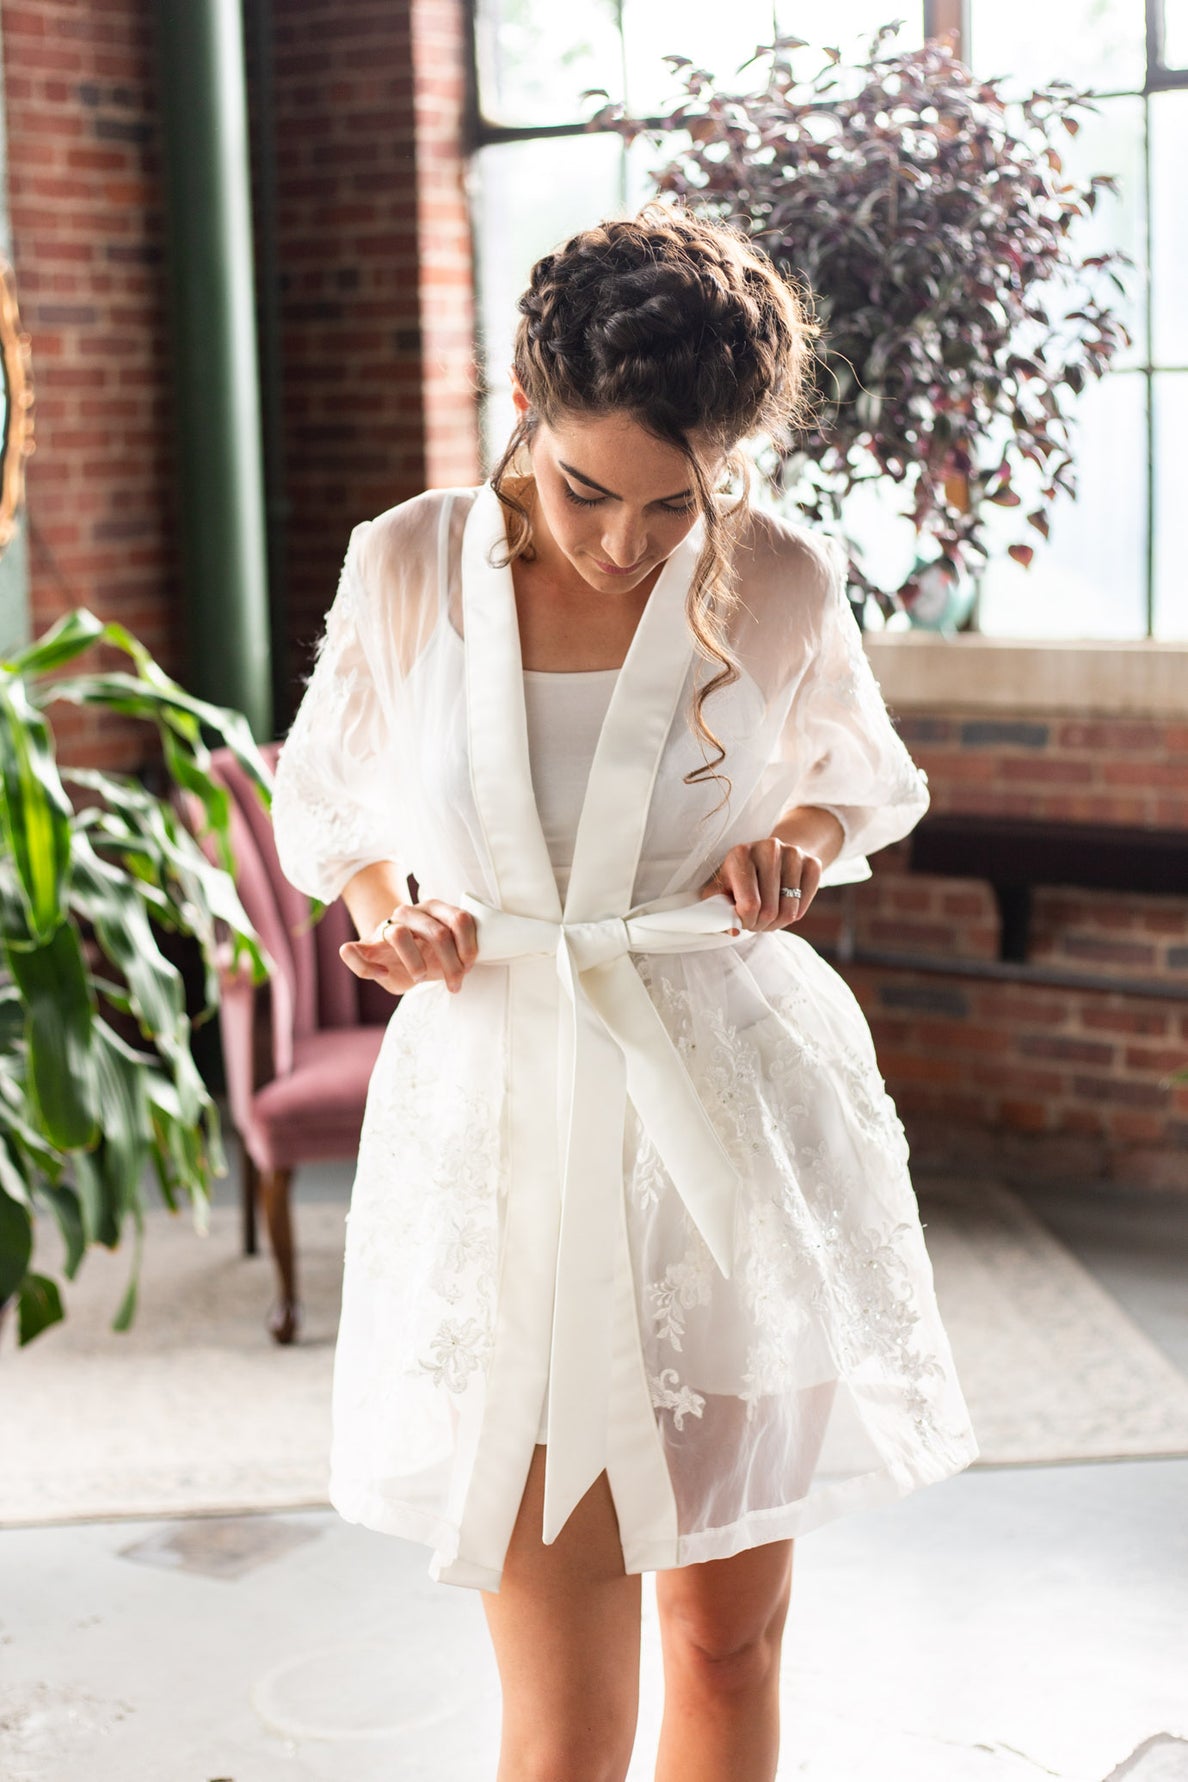 Wedding Dress Made Into a Sheer Anniversary Robe | Unbox the Dress